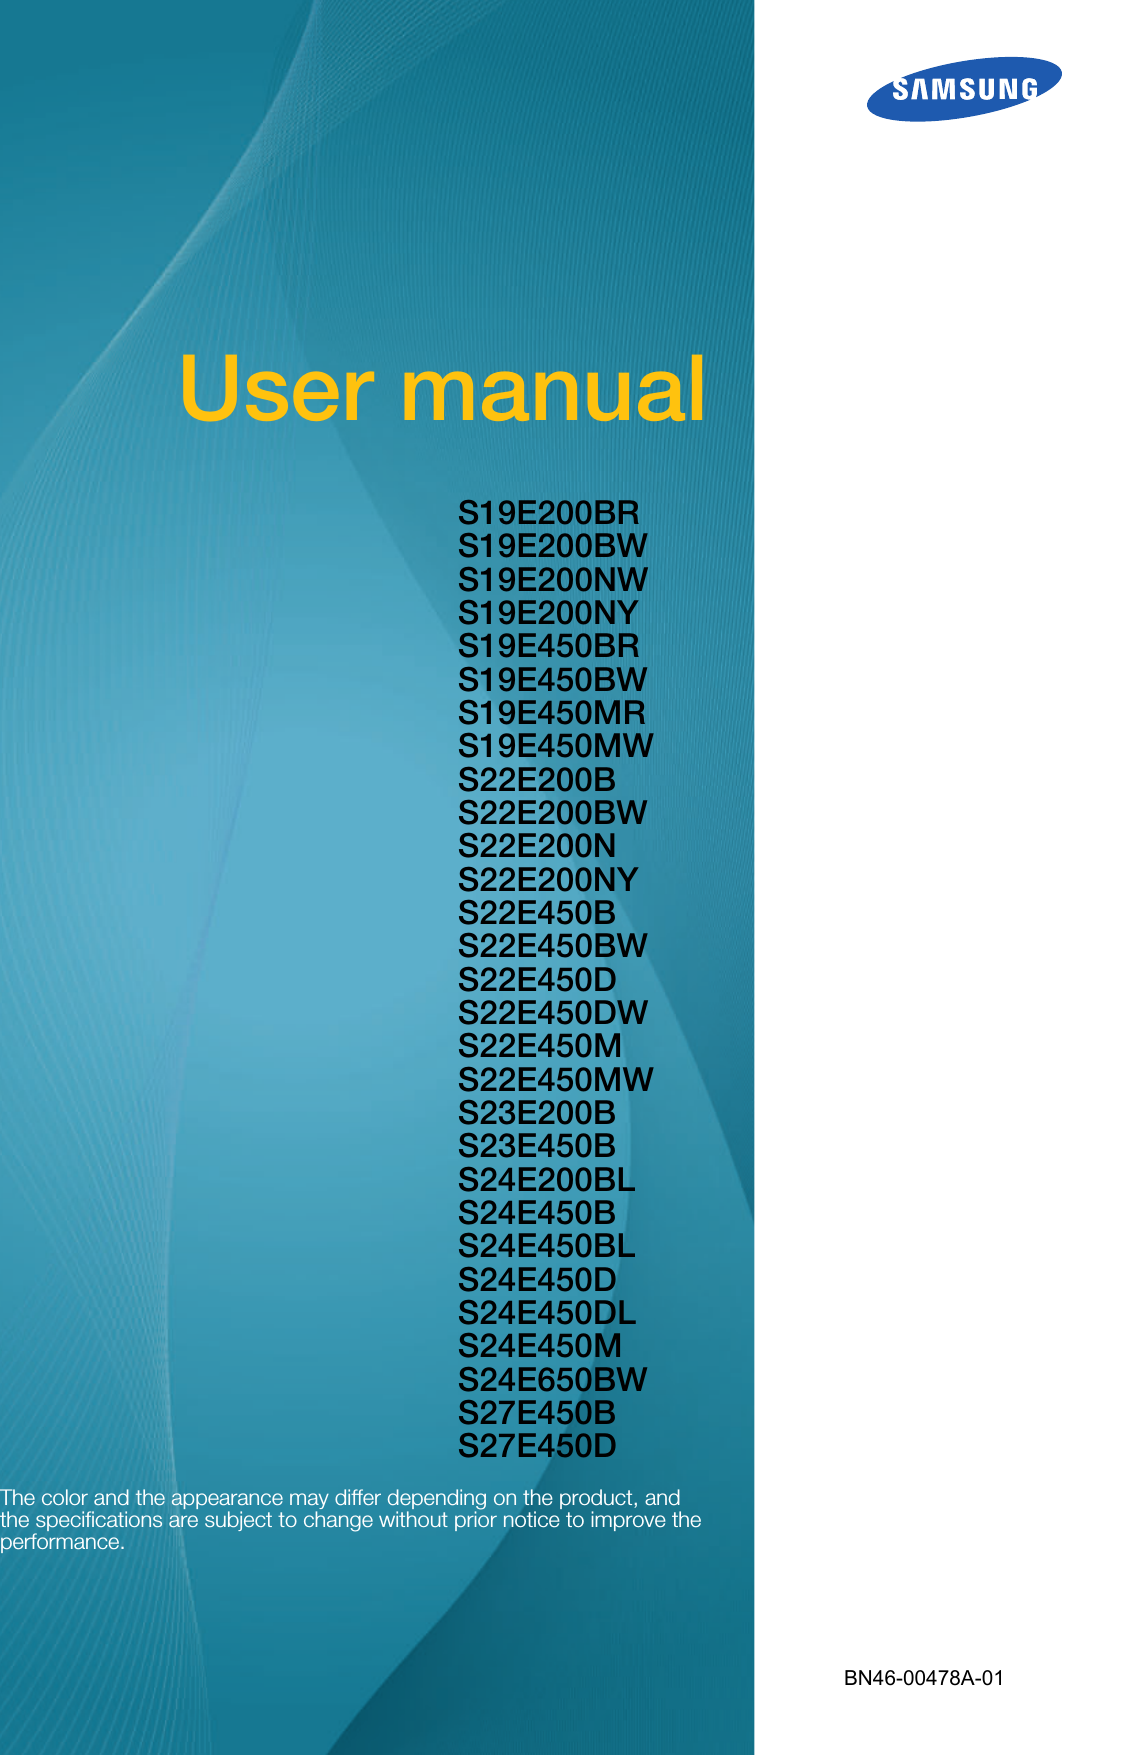 User manualS19E200BR S19E200BW S19E200NW S19E200NY S19E450BRS19E450BWS19E450MR S19E450MW S22E200B S22E200BWS22E200NS22E200NYS22E450BS22E450BW S22E450DS22E450DWS22E450M S22E450MW S23E200B S23E450B S24E200BL S24E450B S24E450BLS24E450D S24E450DL S24E450M S24E650BWS27E450B S27E450DThe color and the appearance may differ depending on the product, and the specifications are subject to change without prior notice to improve the performance.BN46-00478A-01